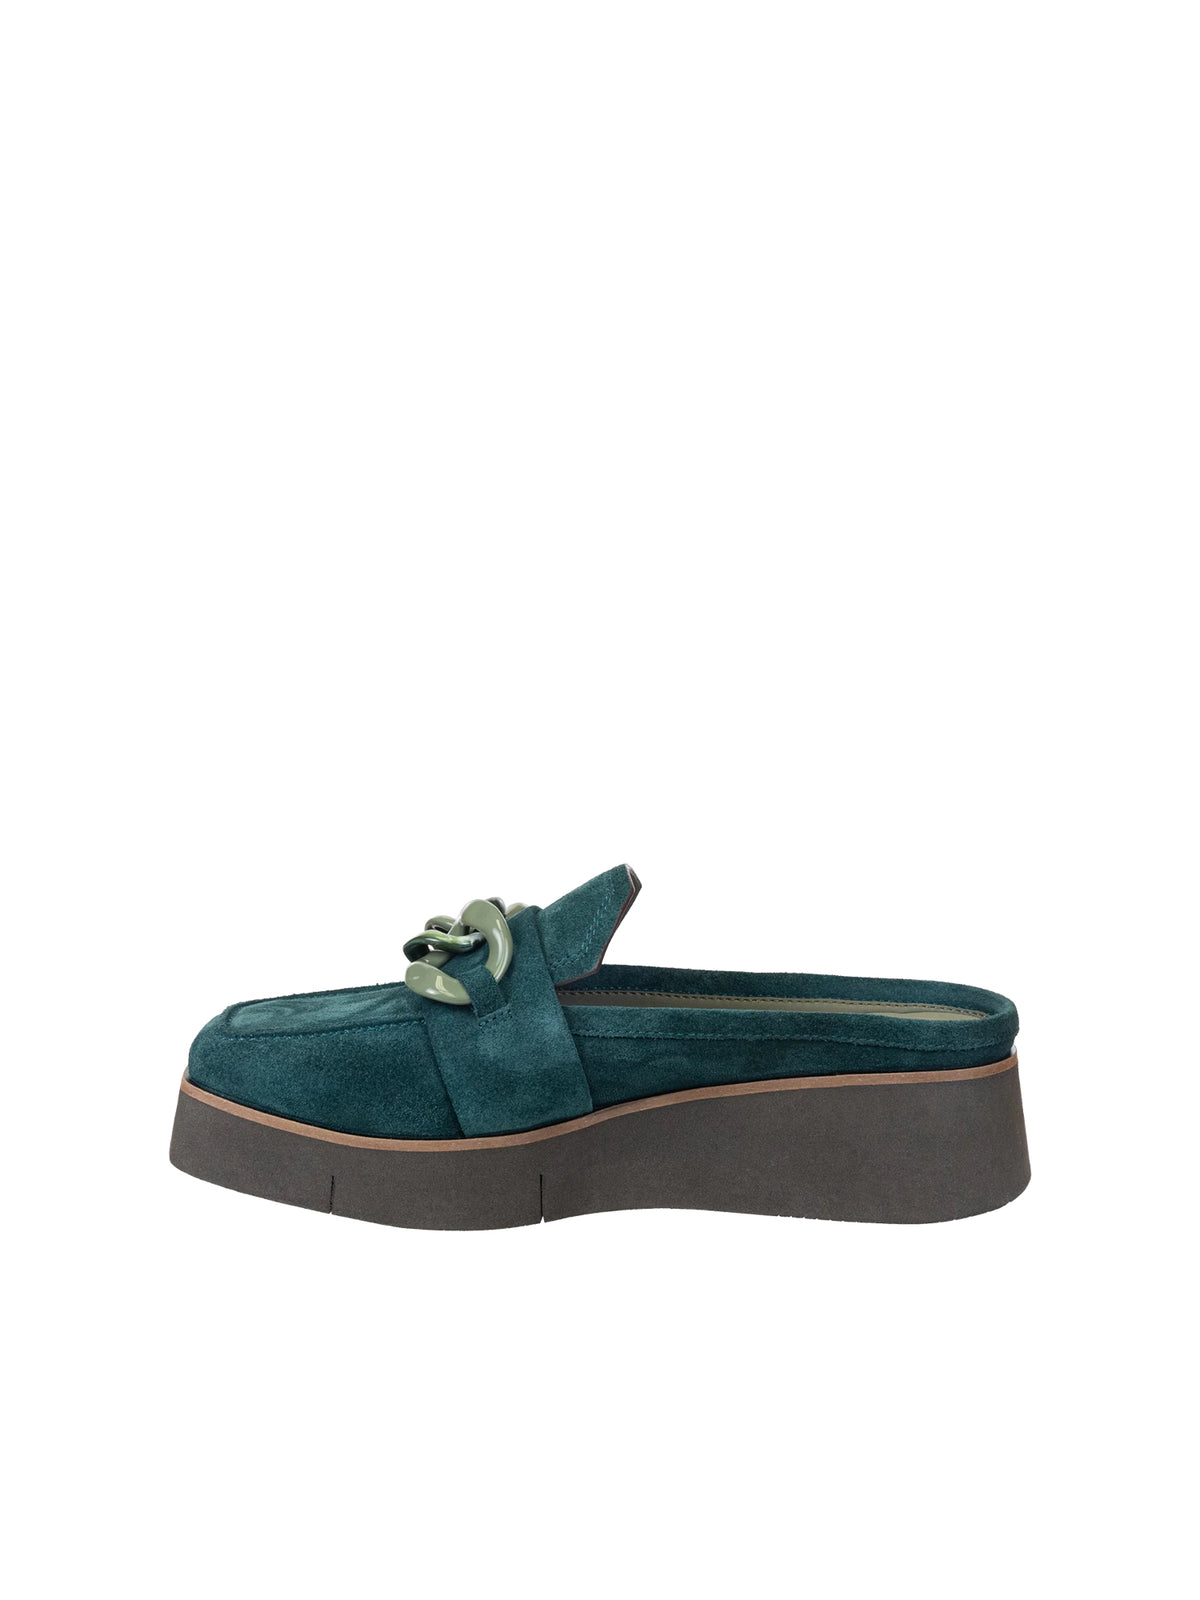 naked feet elect platform mules in emerald green suede